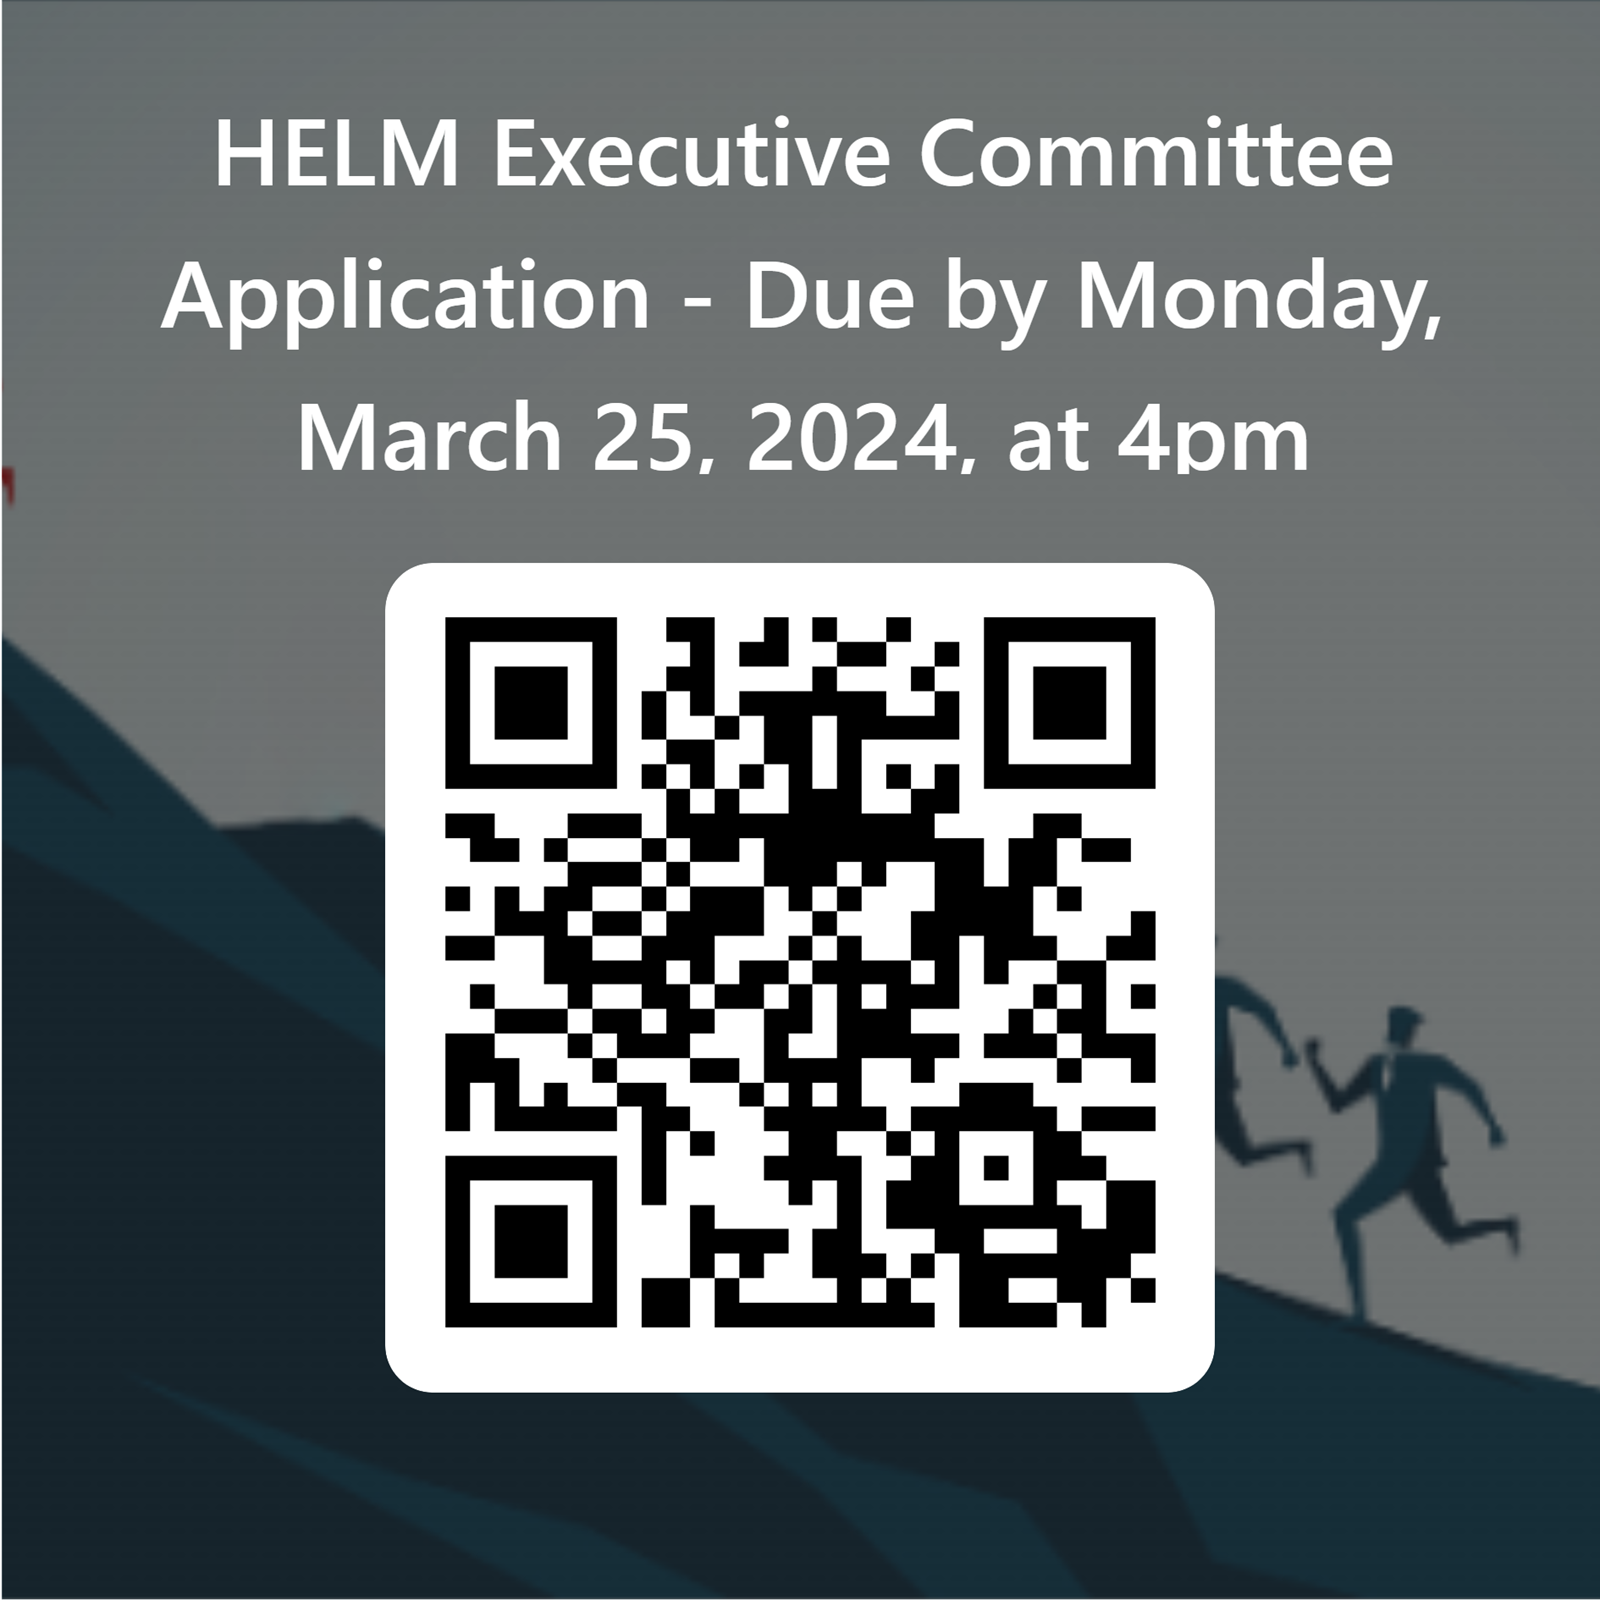 QRCode%20for%20HELM%20Executive%20Committee%20Application%20-%20Due%20by%20Monday,%20March%2025,%202024,%20at%204pm.png